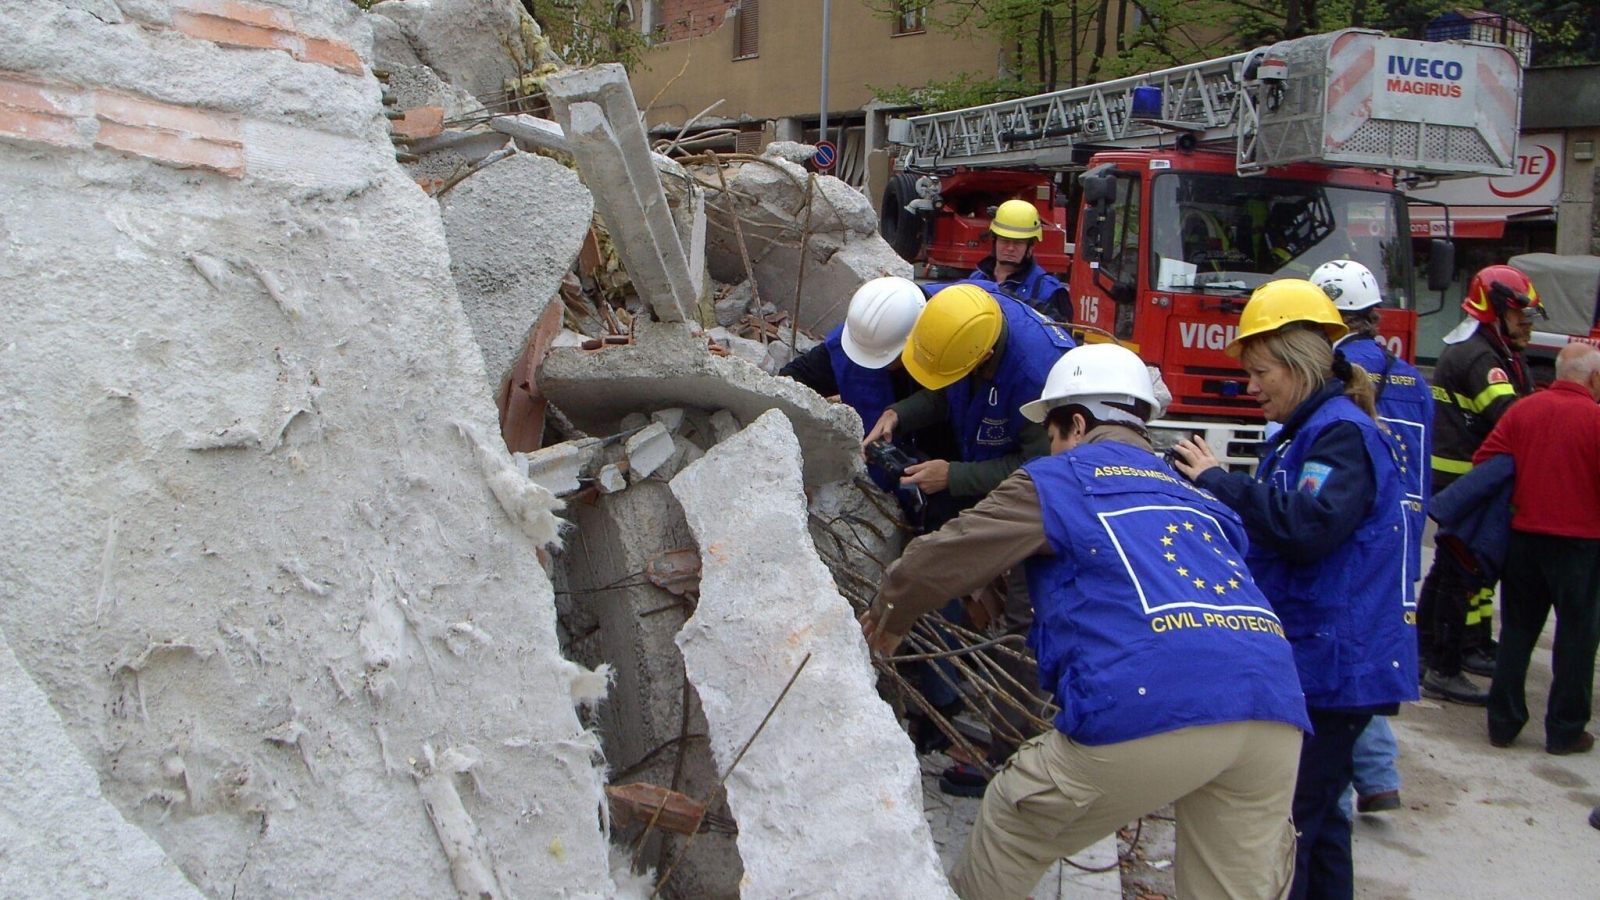 Rescue teams from Eastern Neighbourhood to gather in Moldova for emergency cooperation field exercise on civil protection